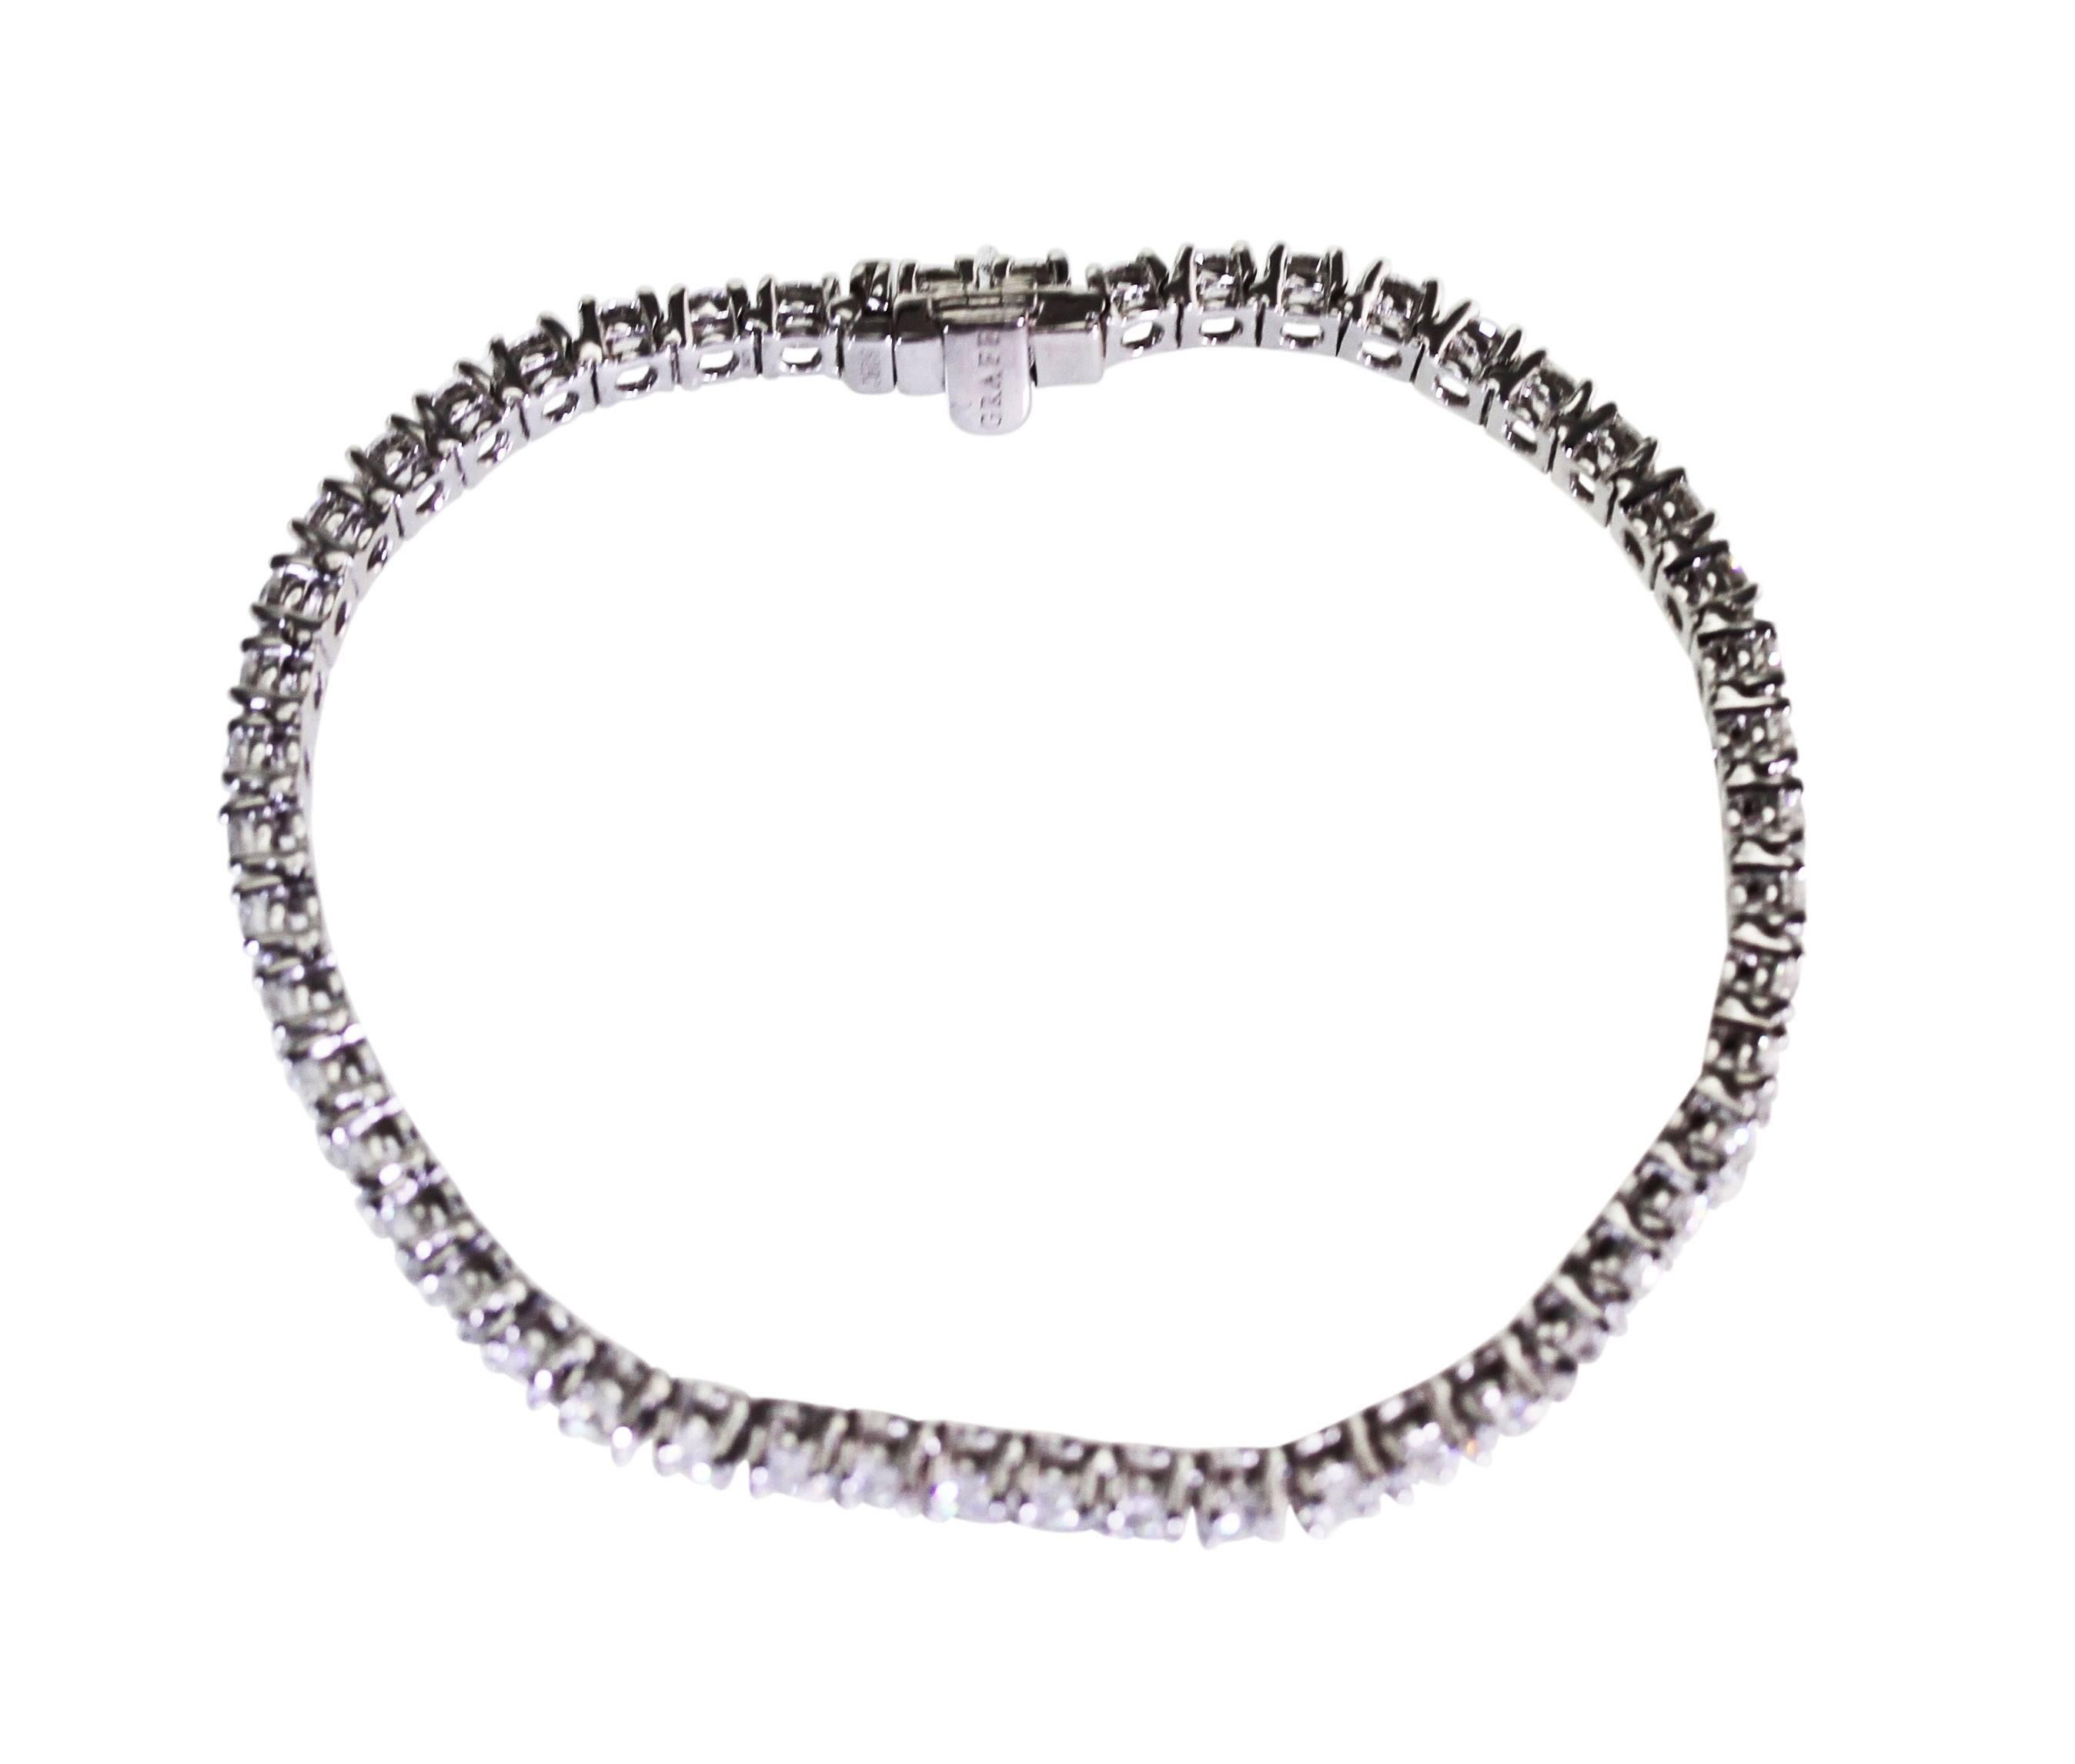 An 18 karat white gold and diamond straight-line bracelet by Graff, set with 53 round diamonds weighing 8.42 carats, measuring 7 1/4 inches, gross weight 16.1 grams, signed Graff, numbered 5280, stamped AU.
Accompanied by Graff  Replacement